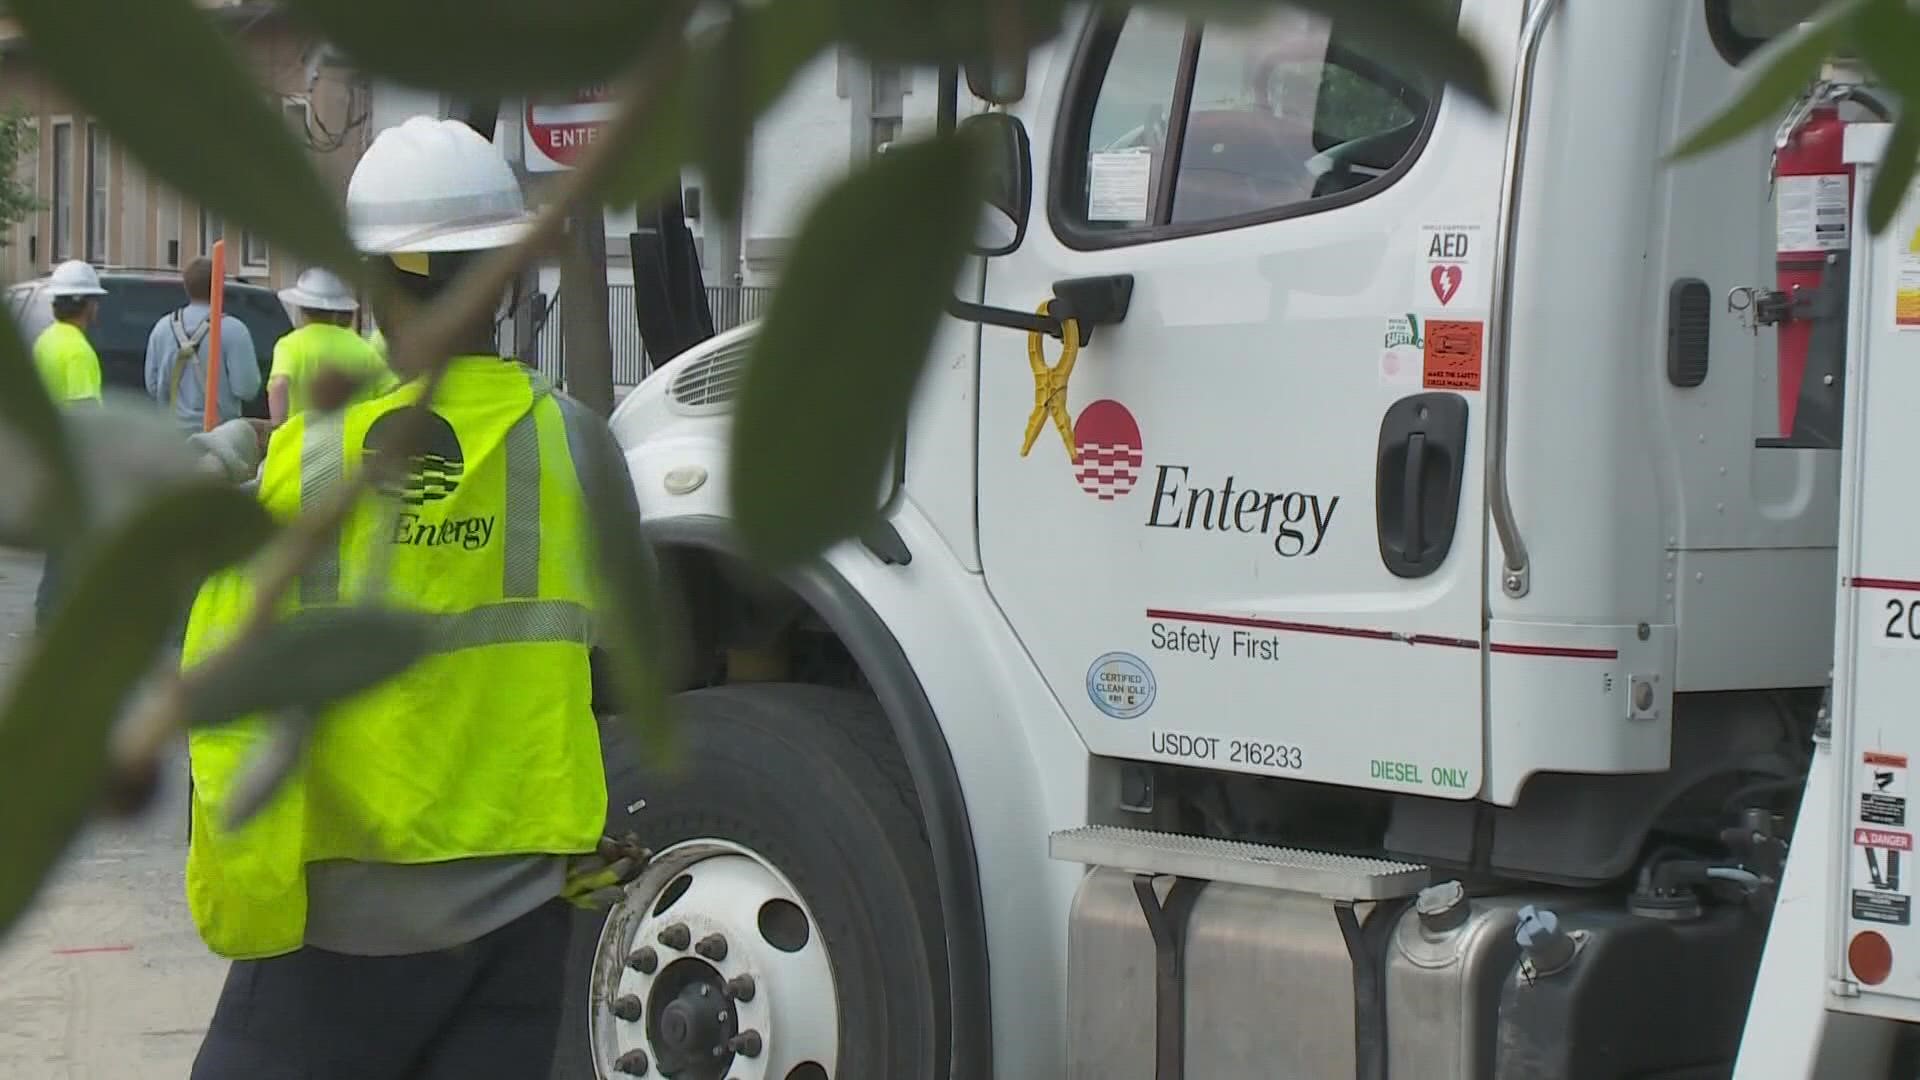 Representatives with Entergy spoke before the New Orleans City Council on Tuesday morning.